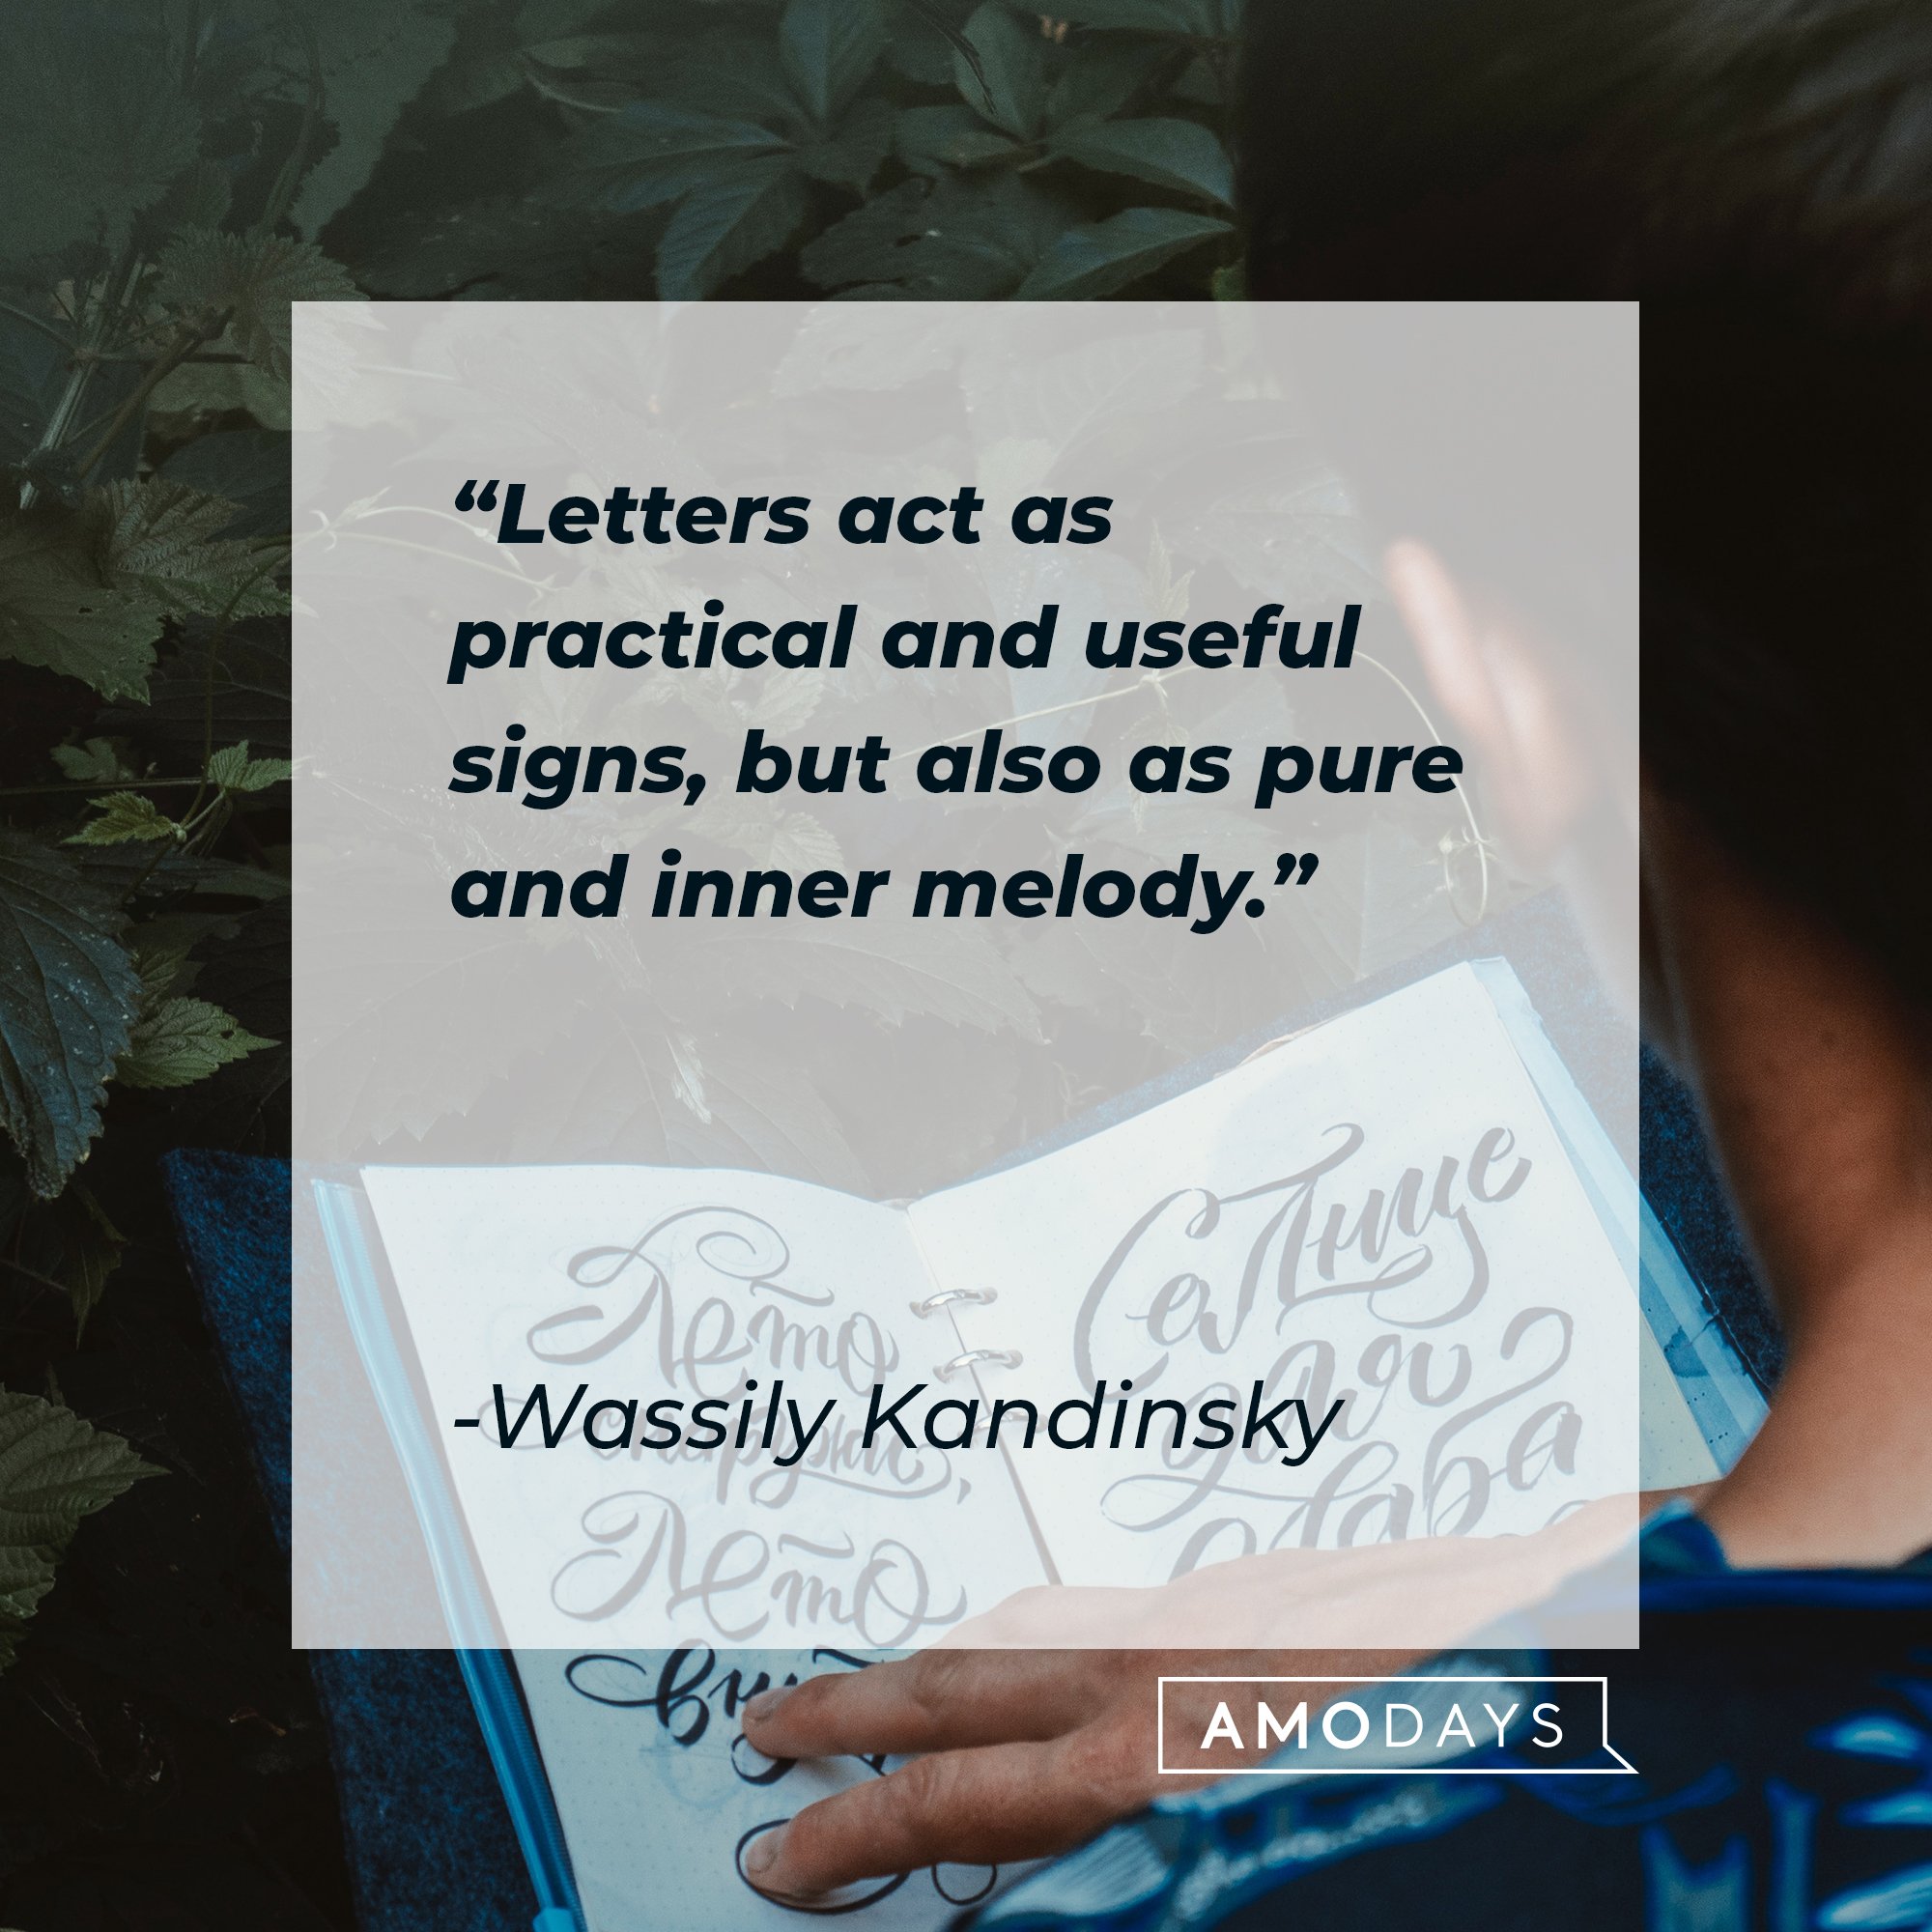 Wassily Kandinsky’s quote: "Letters act as practical and useful signs, but also as pure and inner melody." | Image: AmoDays 